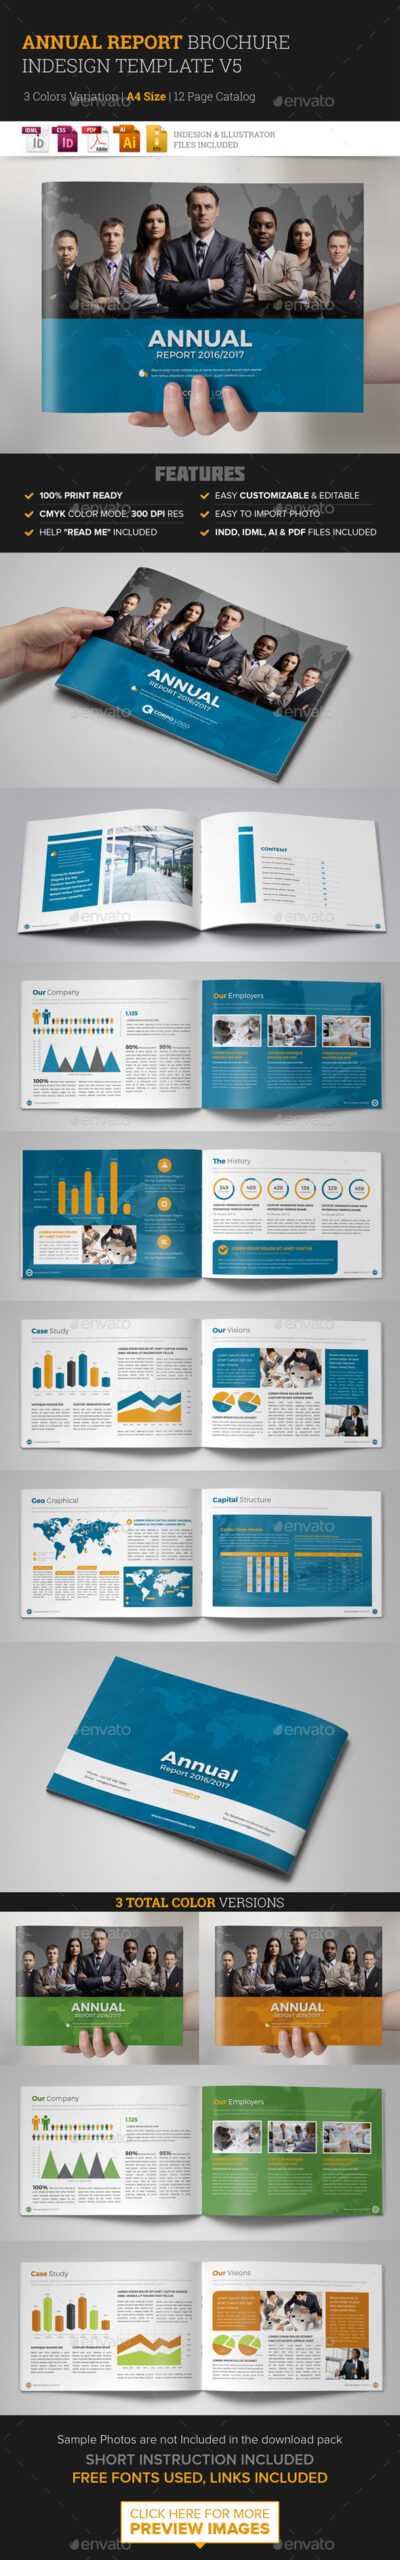 Annual Report Template Indesign Graphics, Designs & Templates Intended For Free Indesign Report Templates